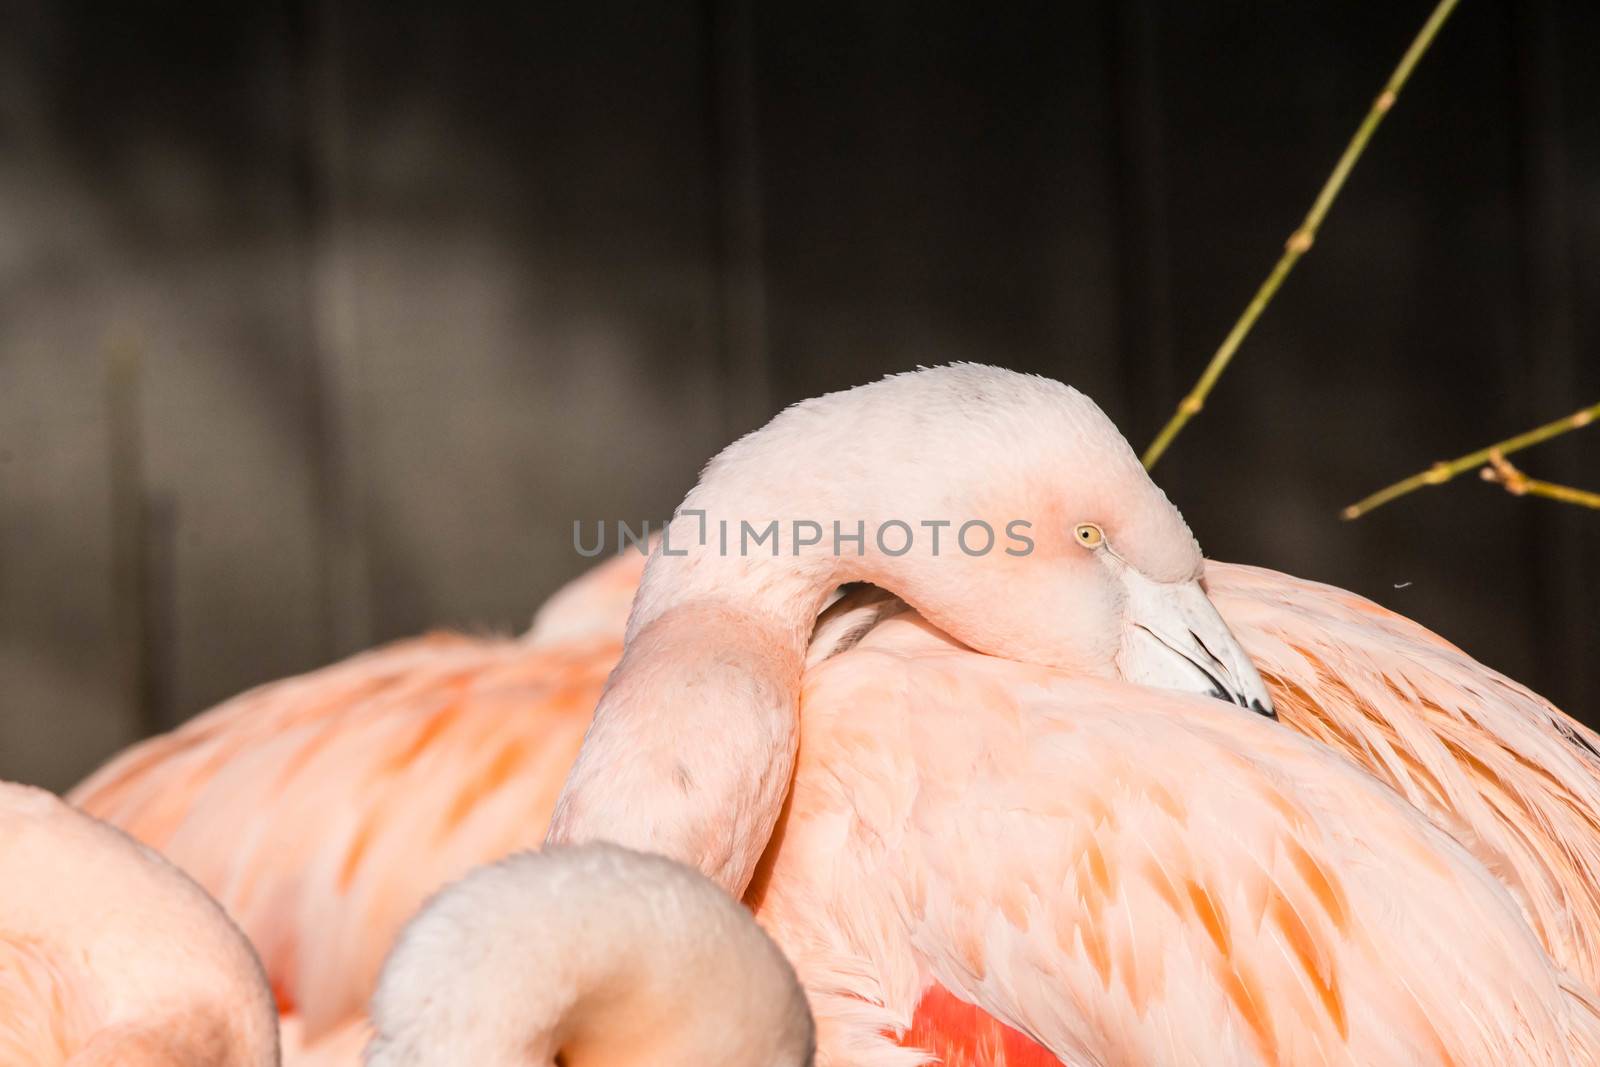 Flamingos in sleeping positions by cestes001